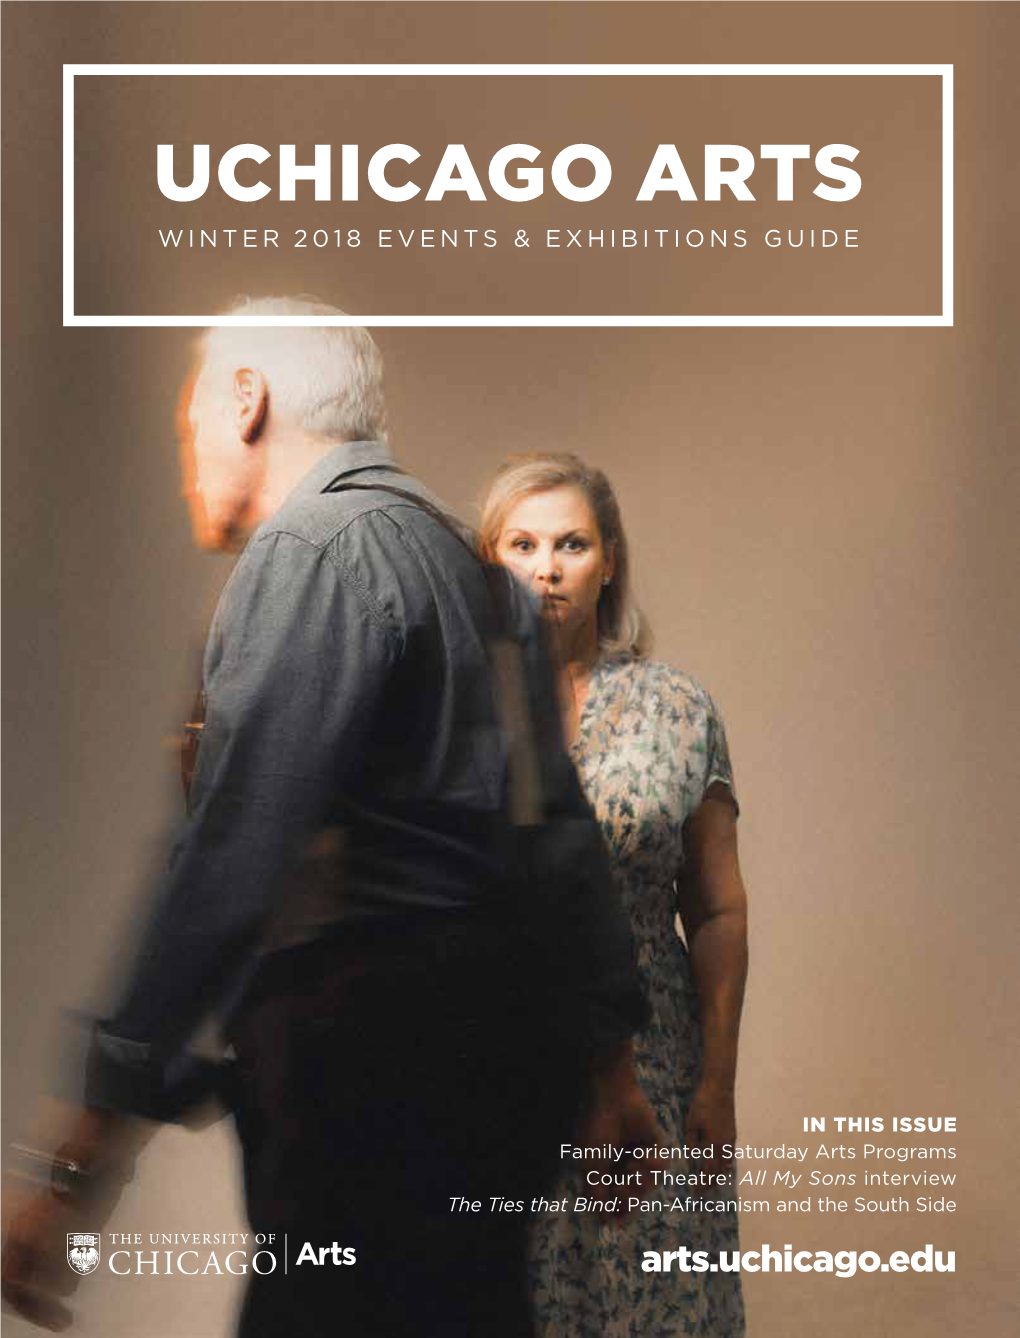 Uchicago Arts Winter 2018 Events & Exhibitions Guide